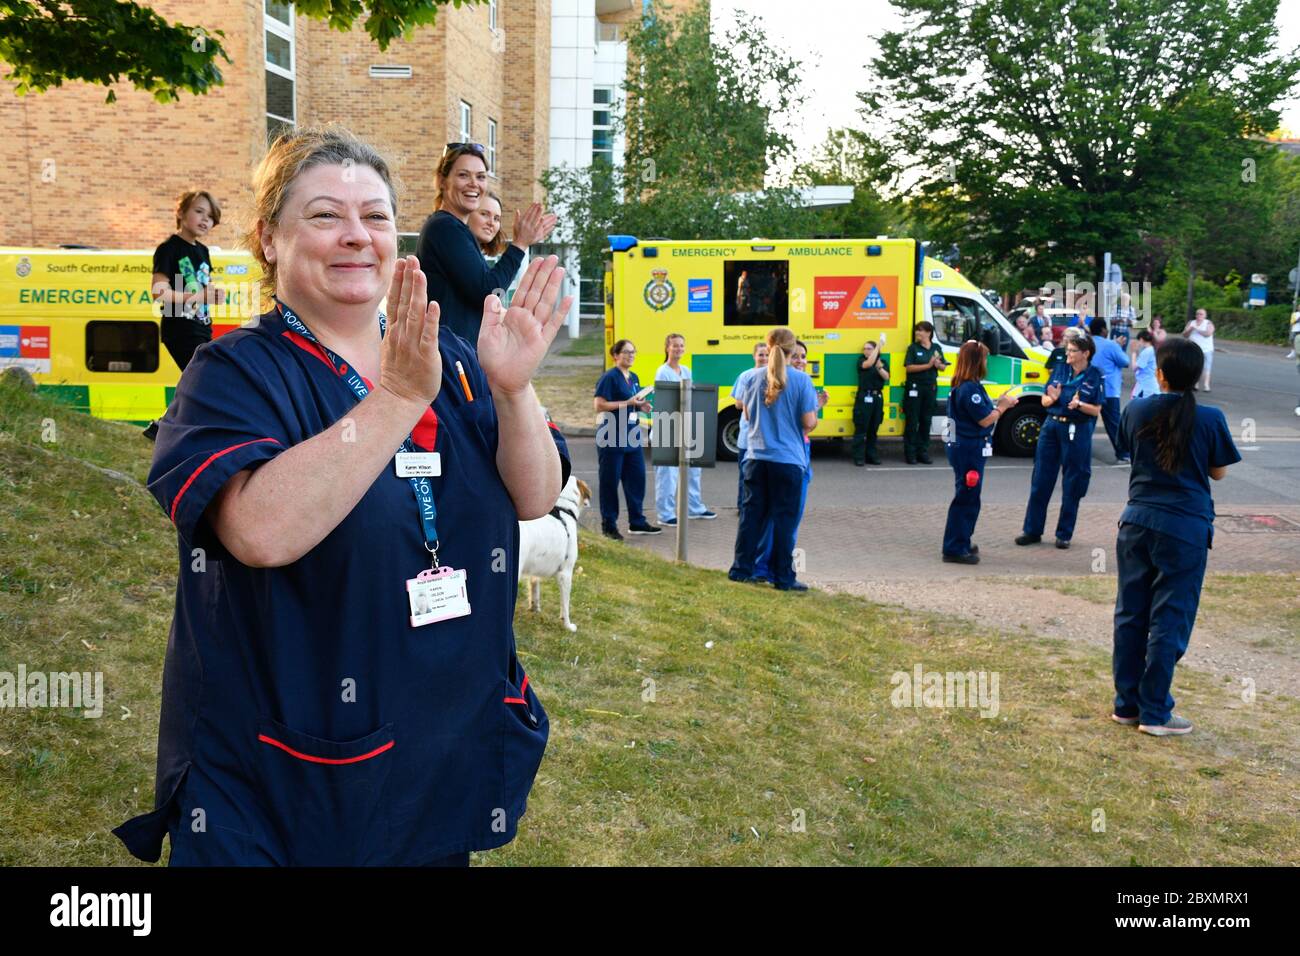 Clinical Support Manager clapping at Thursday 8pm celebration during Coronavirus lockdown, Royal Berkshire Hospital UK May 2020 Stock Photo